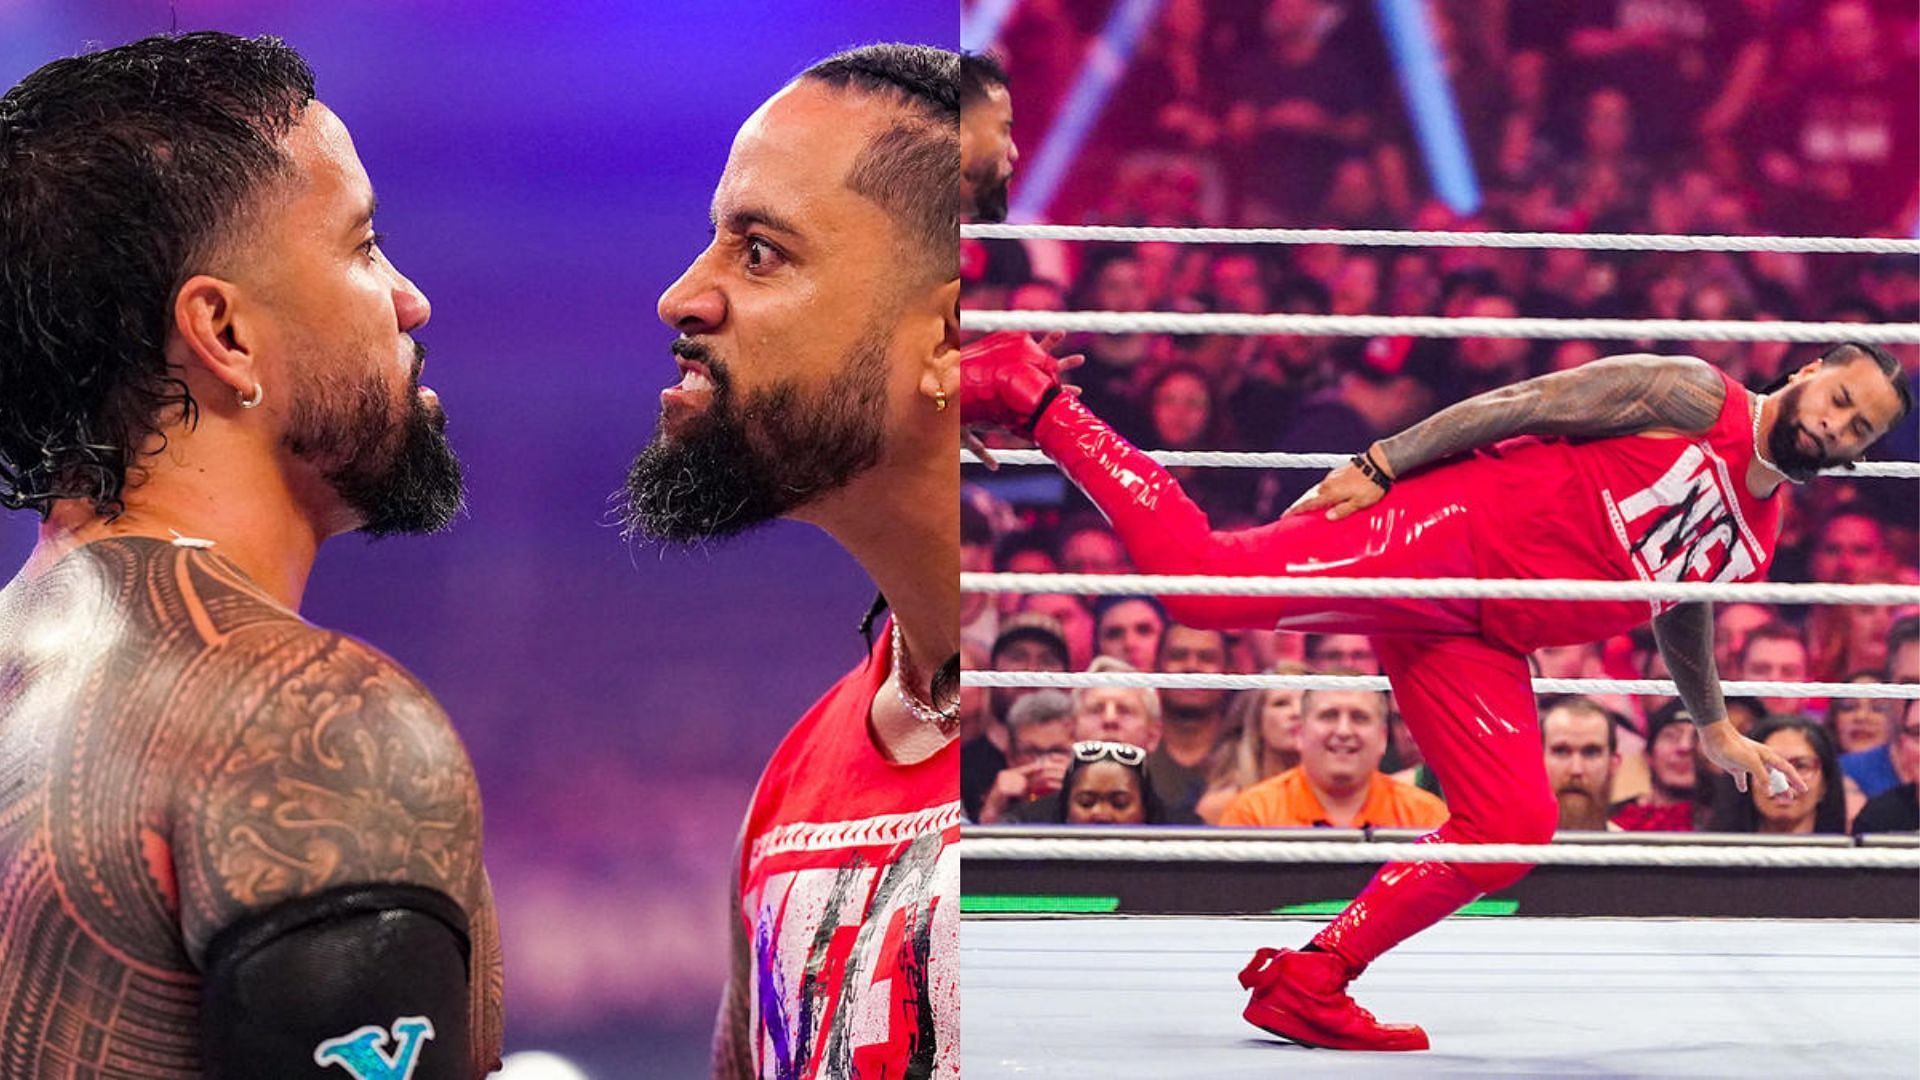 Jey Uso and Jimmy Uso started off the 30-Man Royal Rumble Match